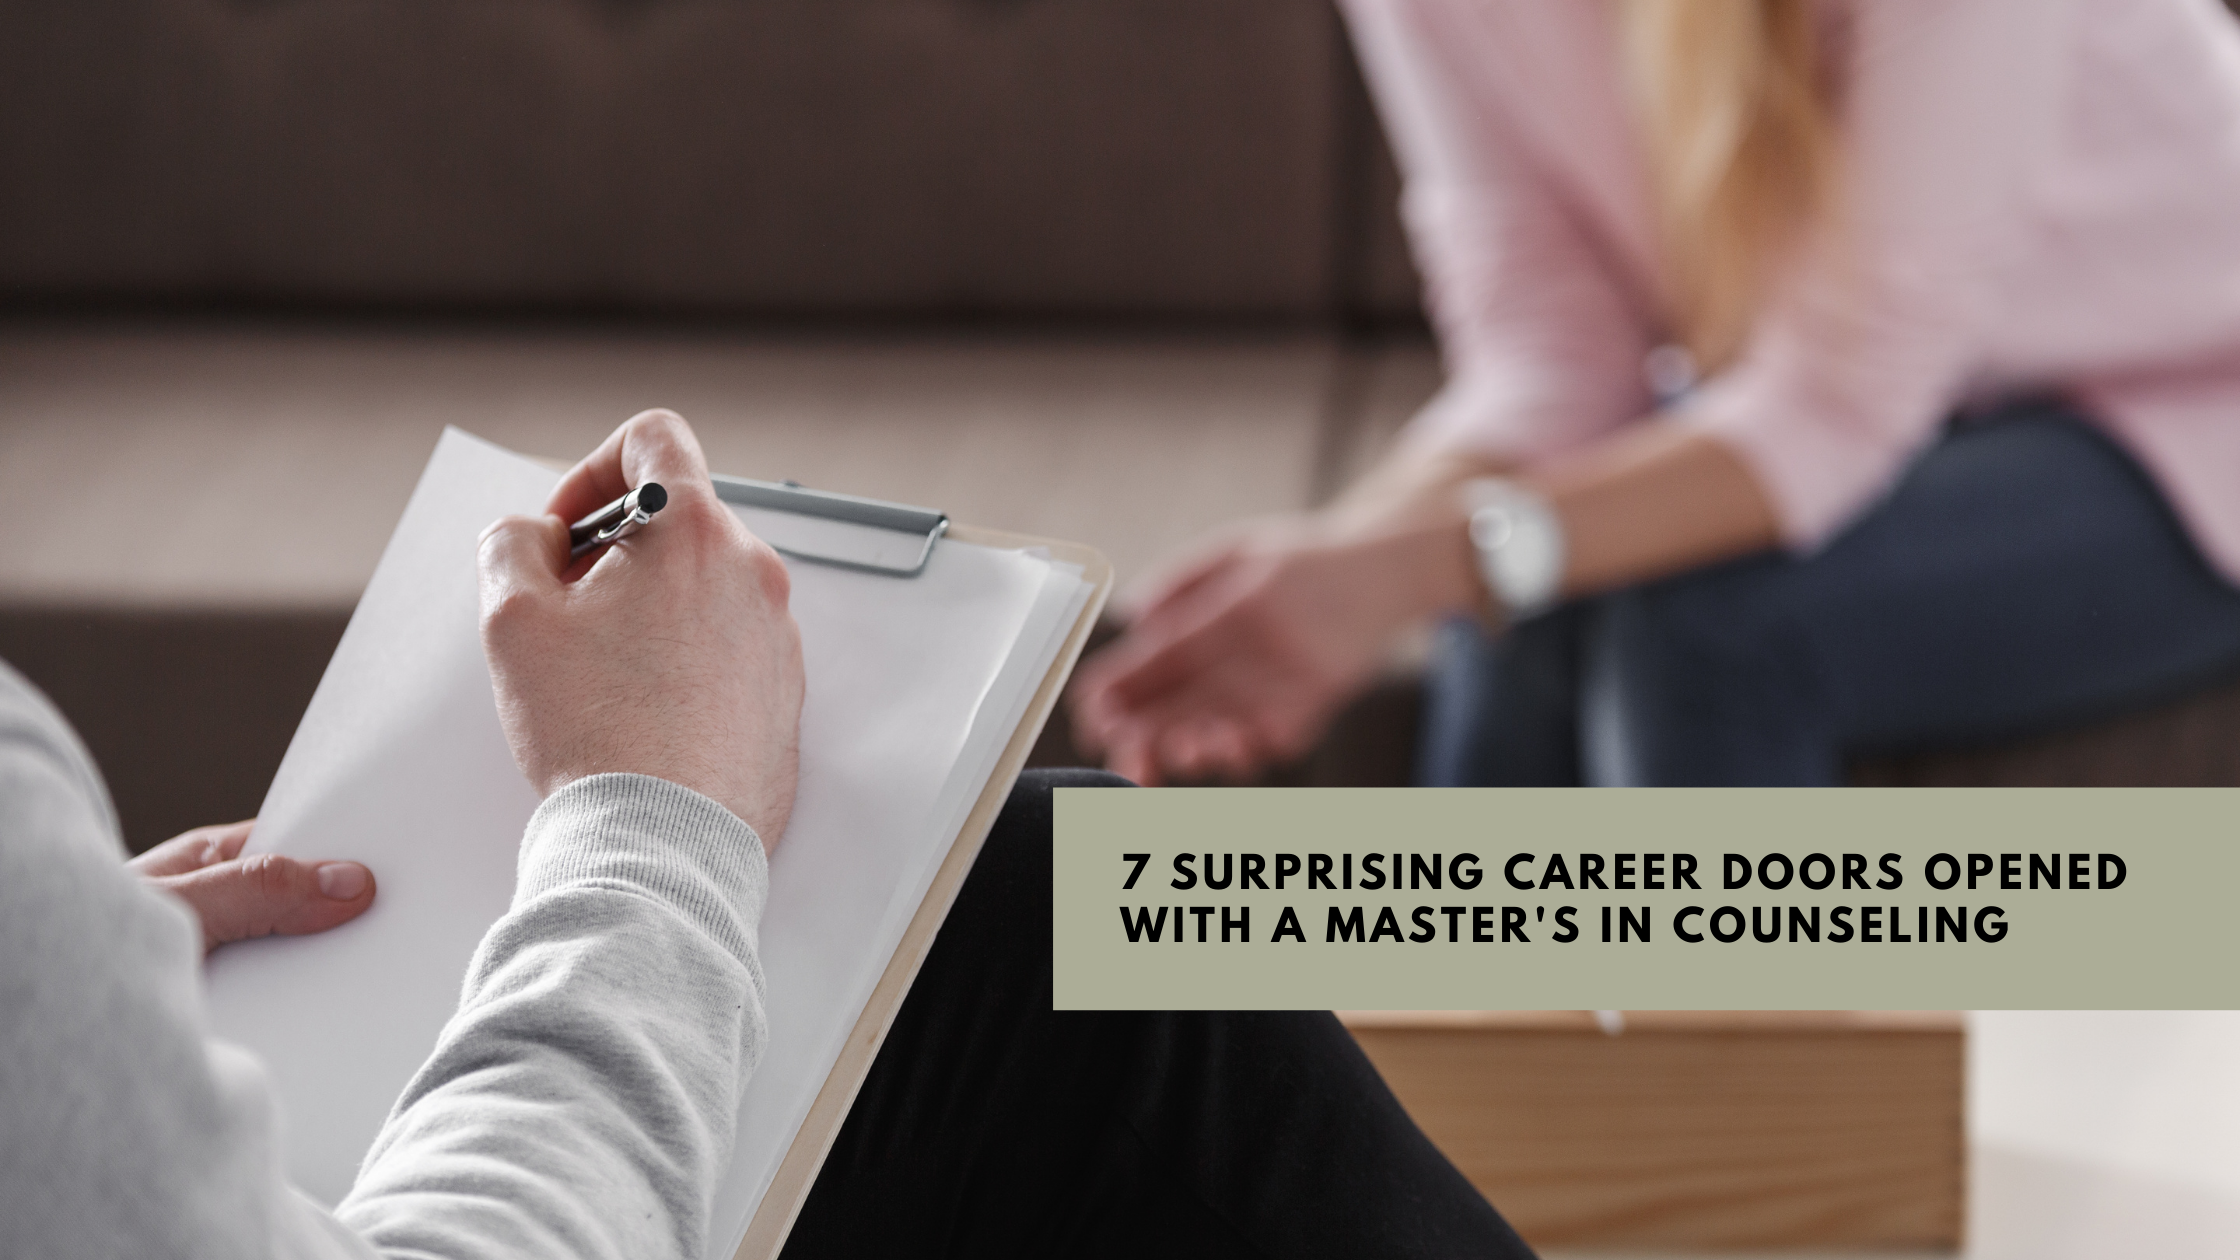 Image of 7 Surprising Career Doors Opened with a Master's in Counseling  